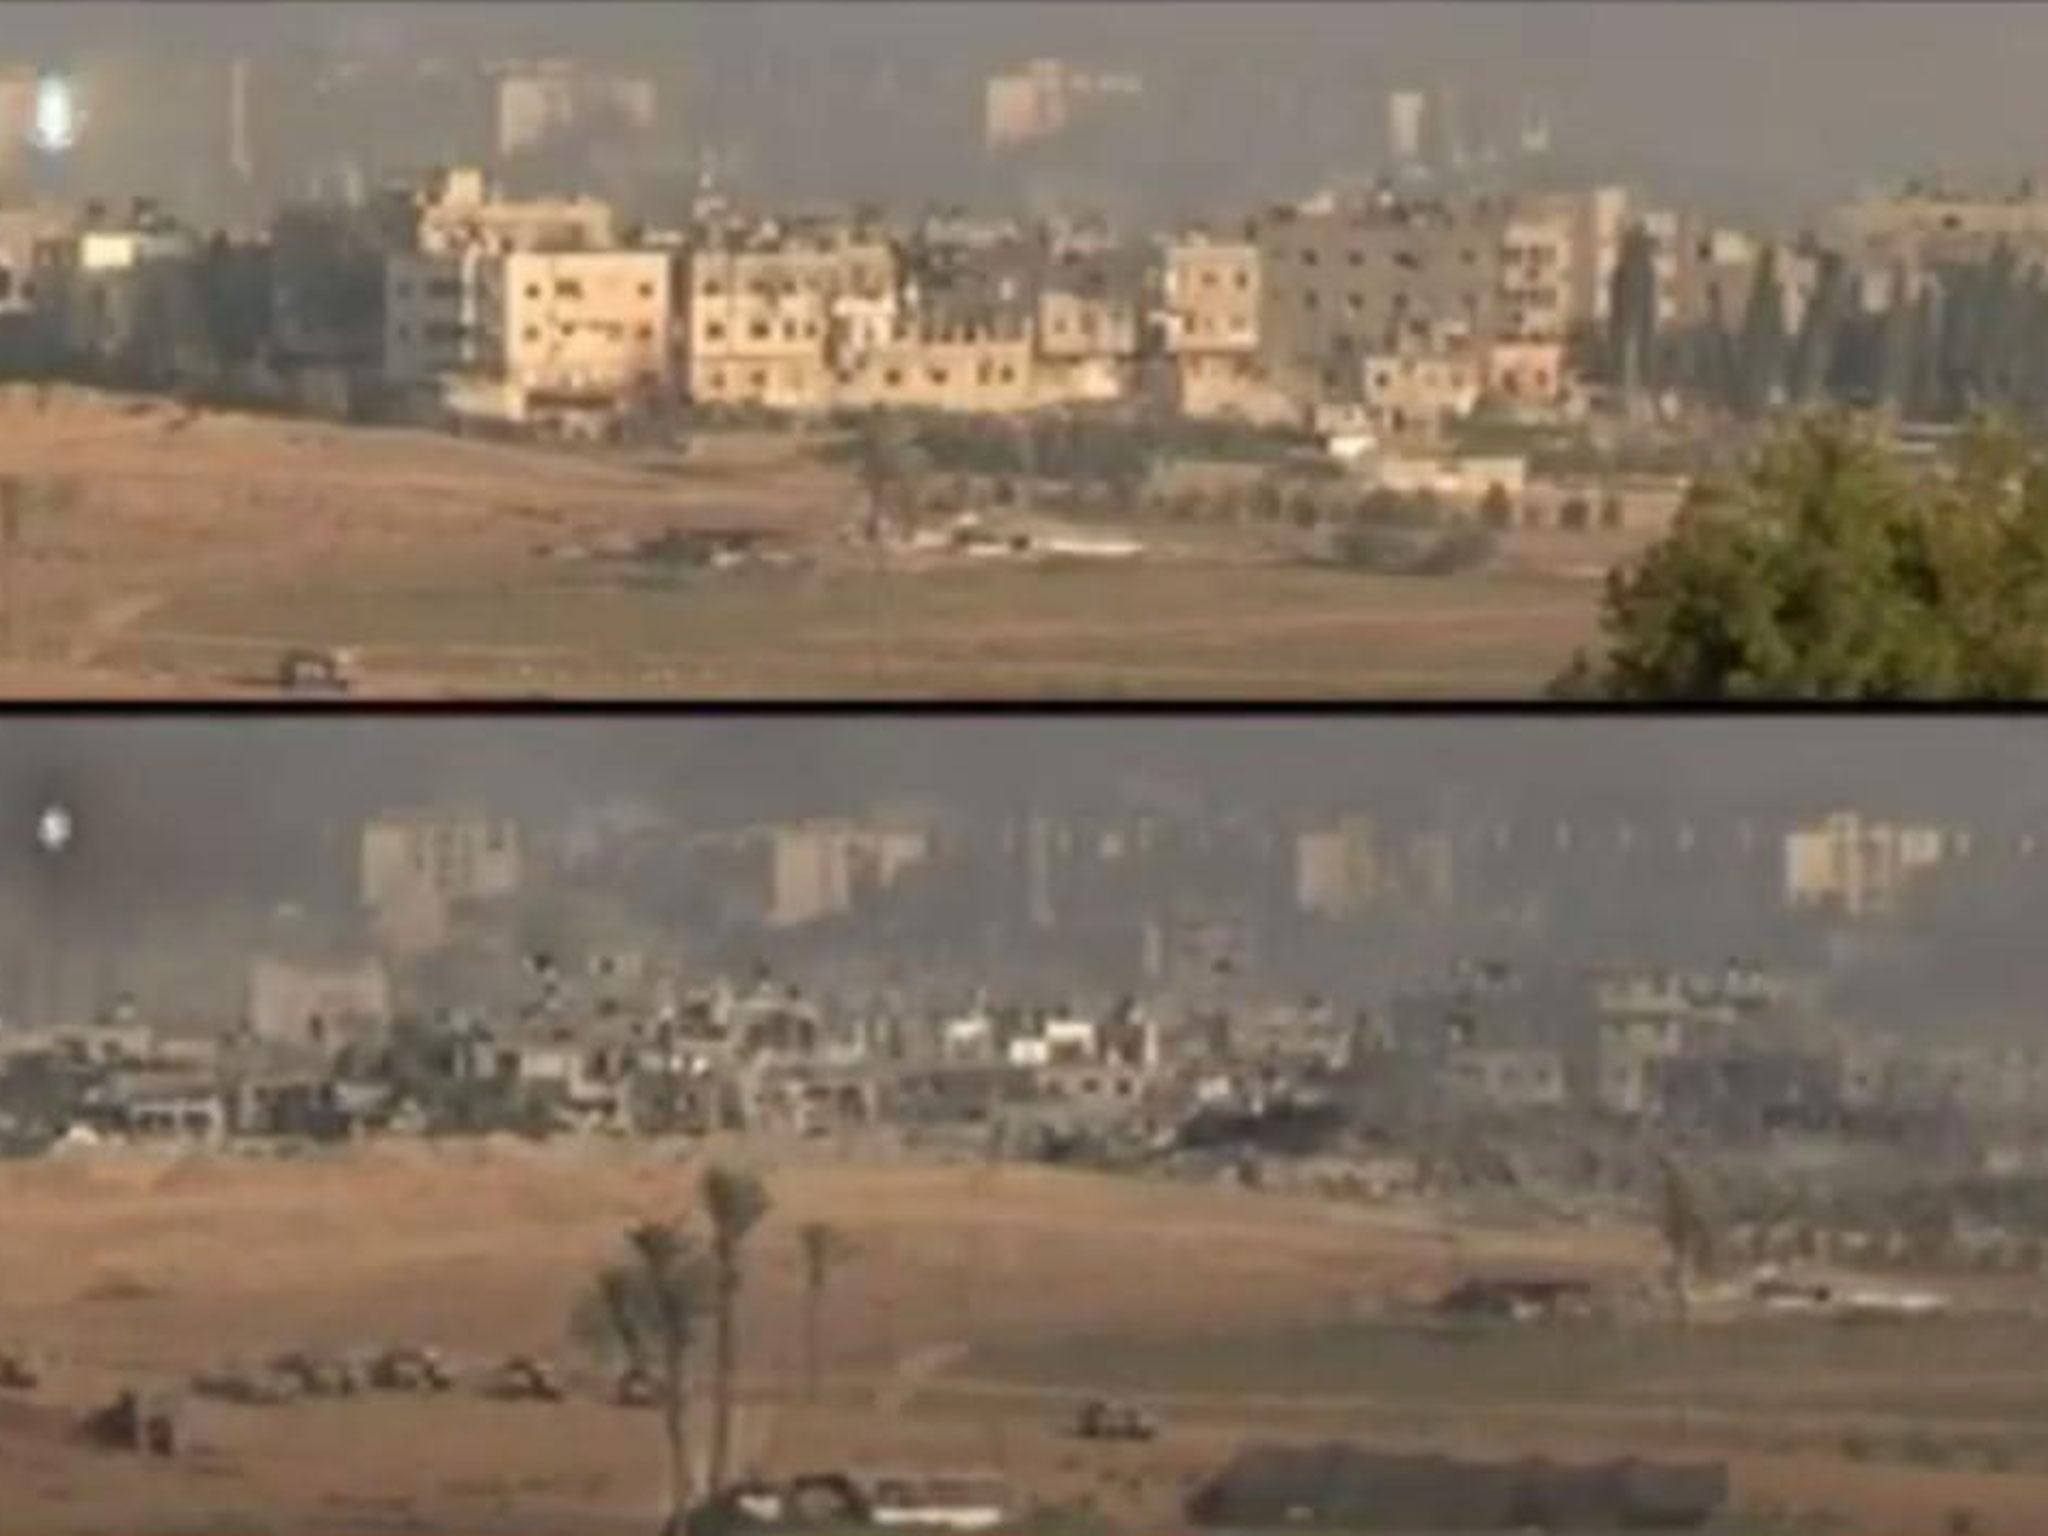 Stills from a video purporting to show a Gaza street before and after it is devastated by an airstrike